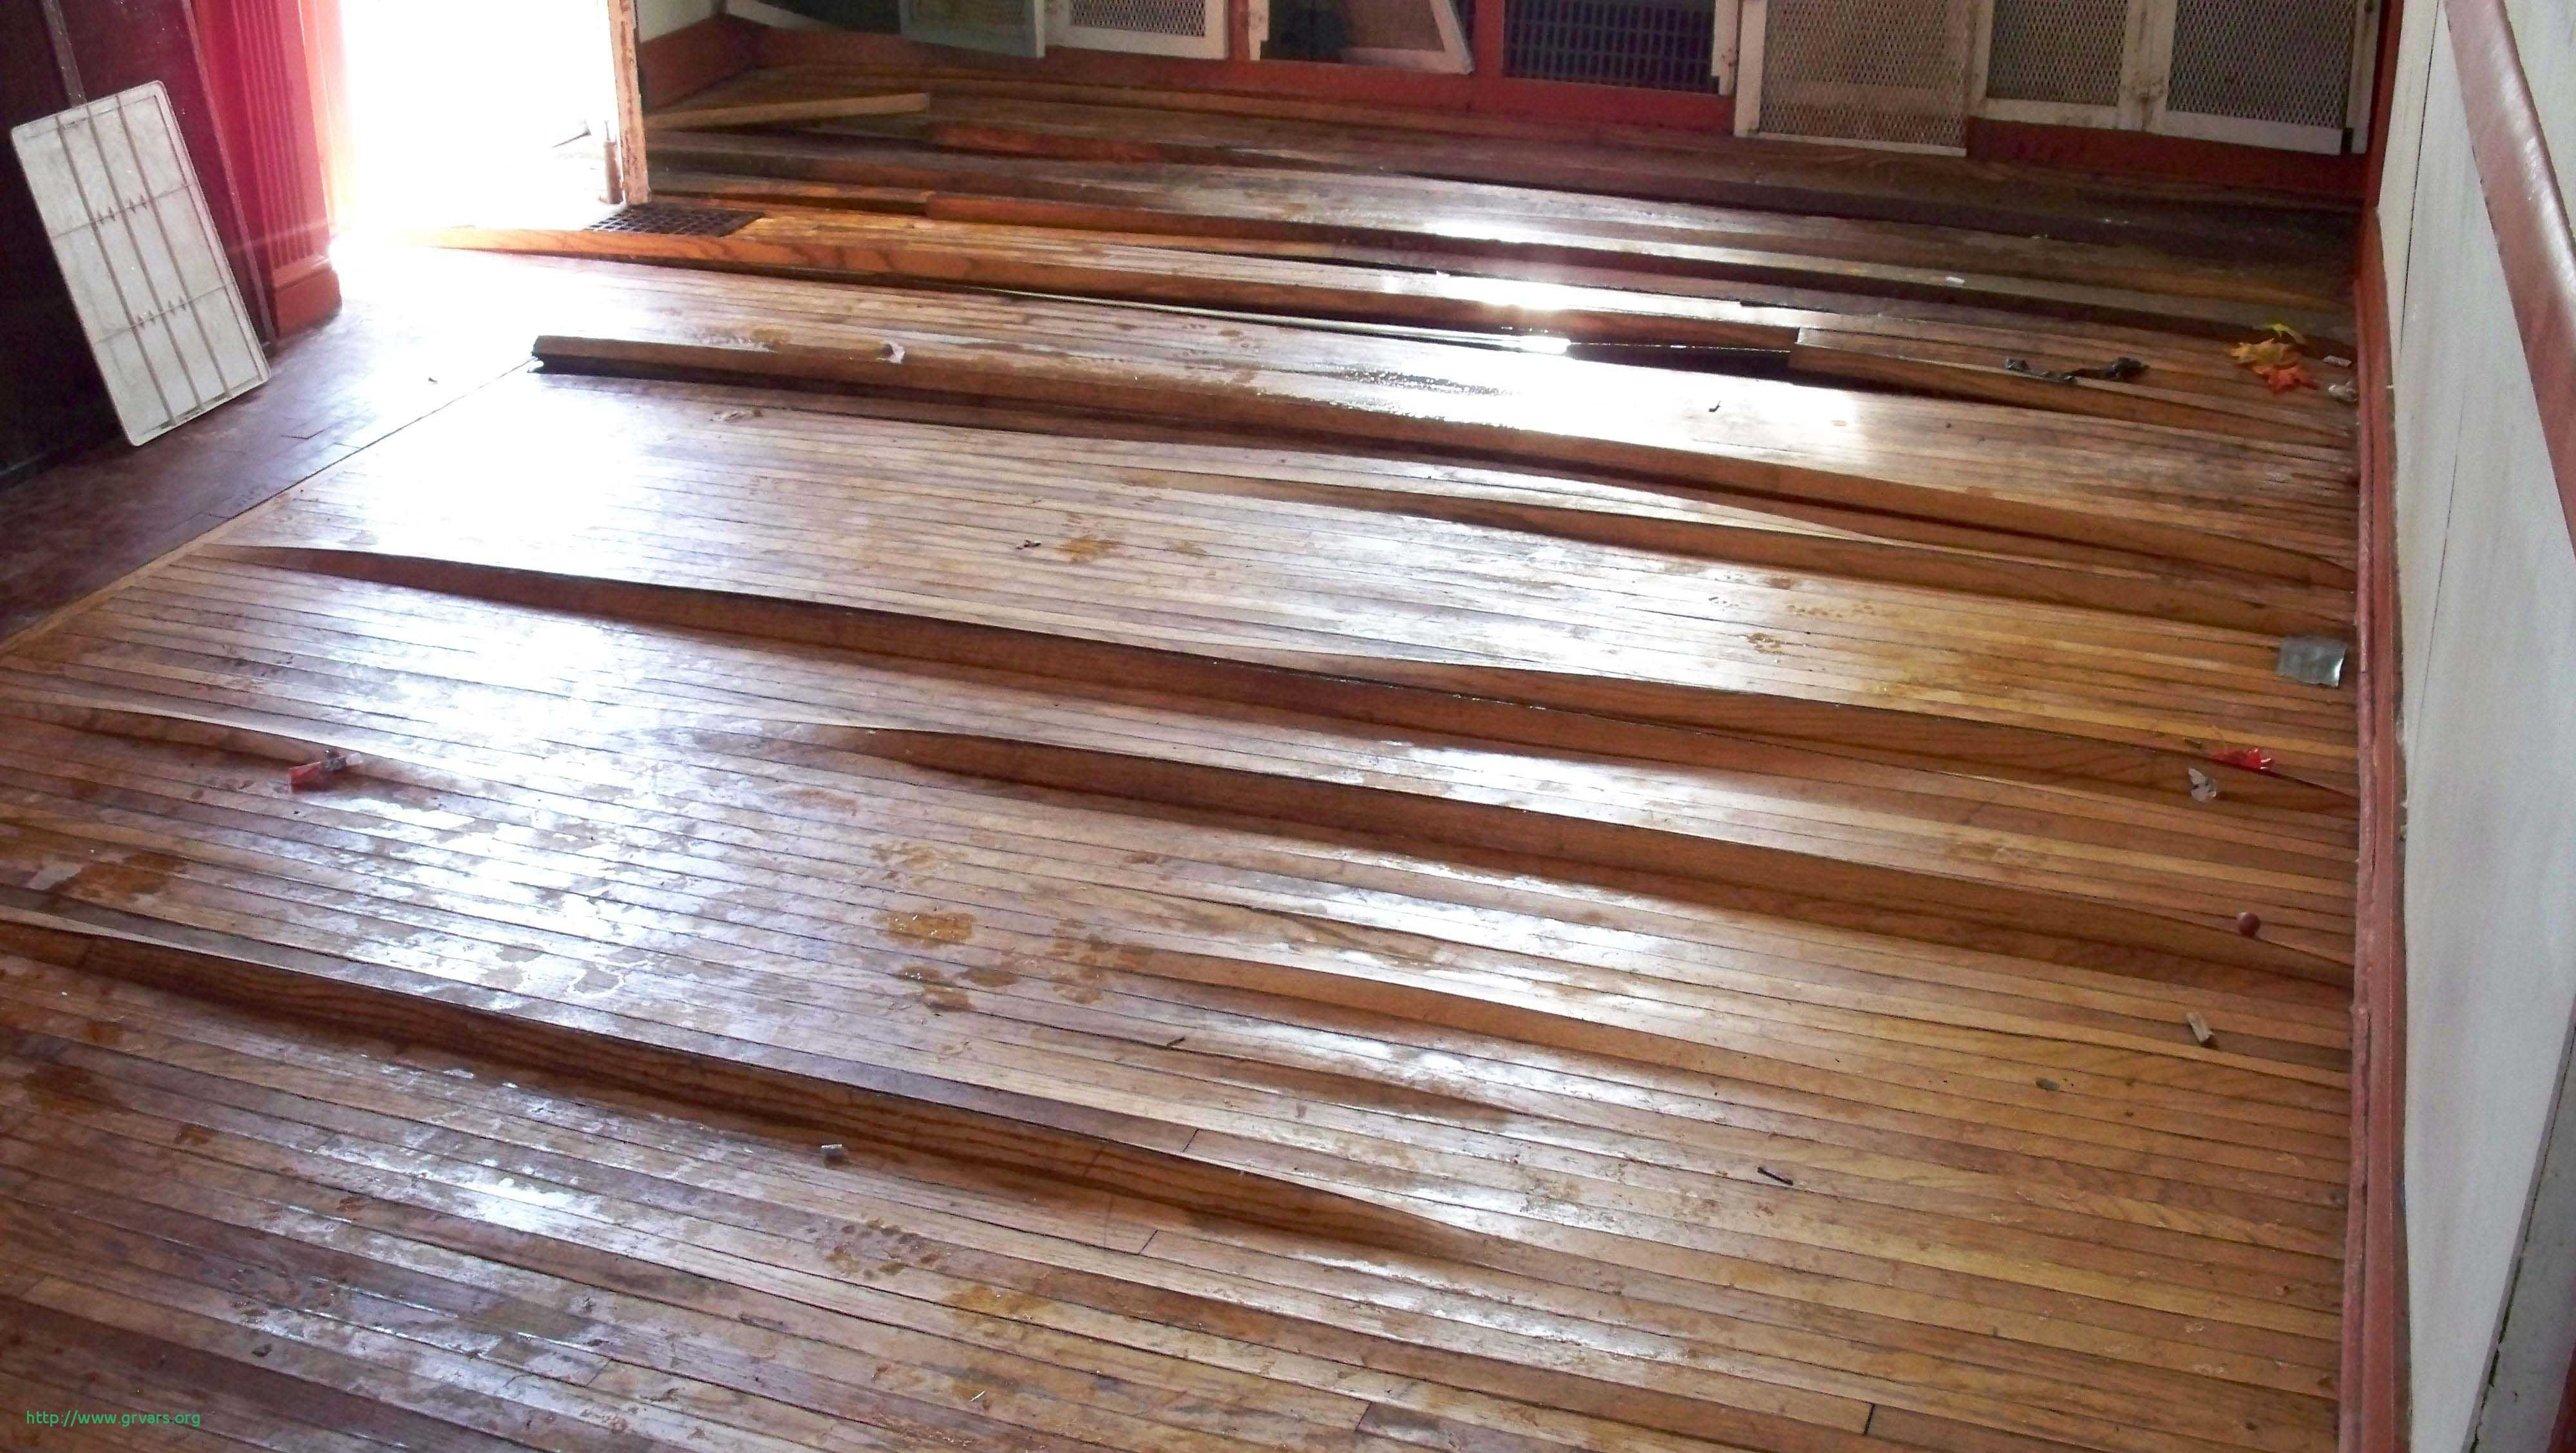 21 Awesome Filling Large Gaps In Hardwood Floors 2024 free download filling large gaps in hardwood floors of 15 nouveau how to fix wood floors from water damage ideas blog pertaining to 15 photos of the 15 nouveau how to fix wood floors from water damage